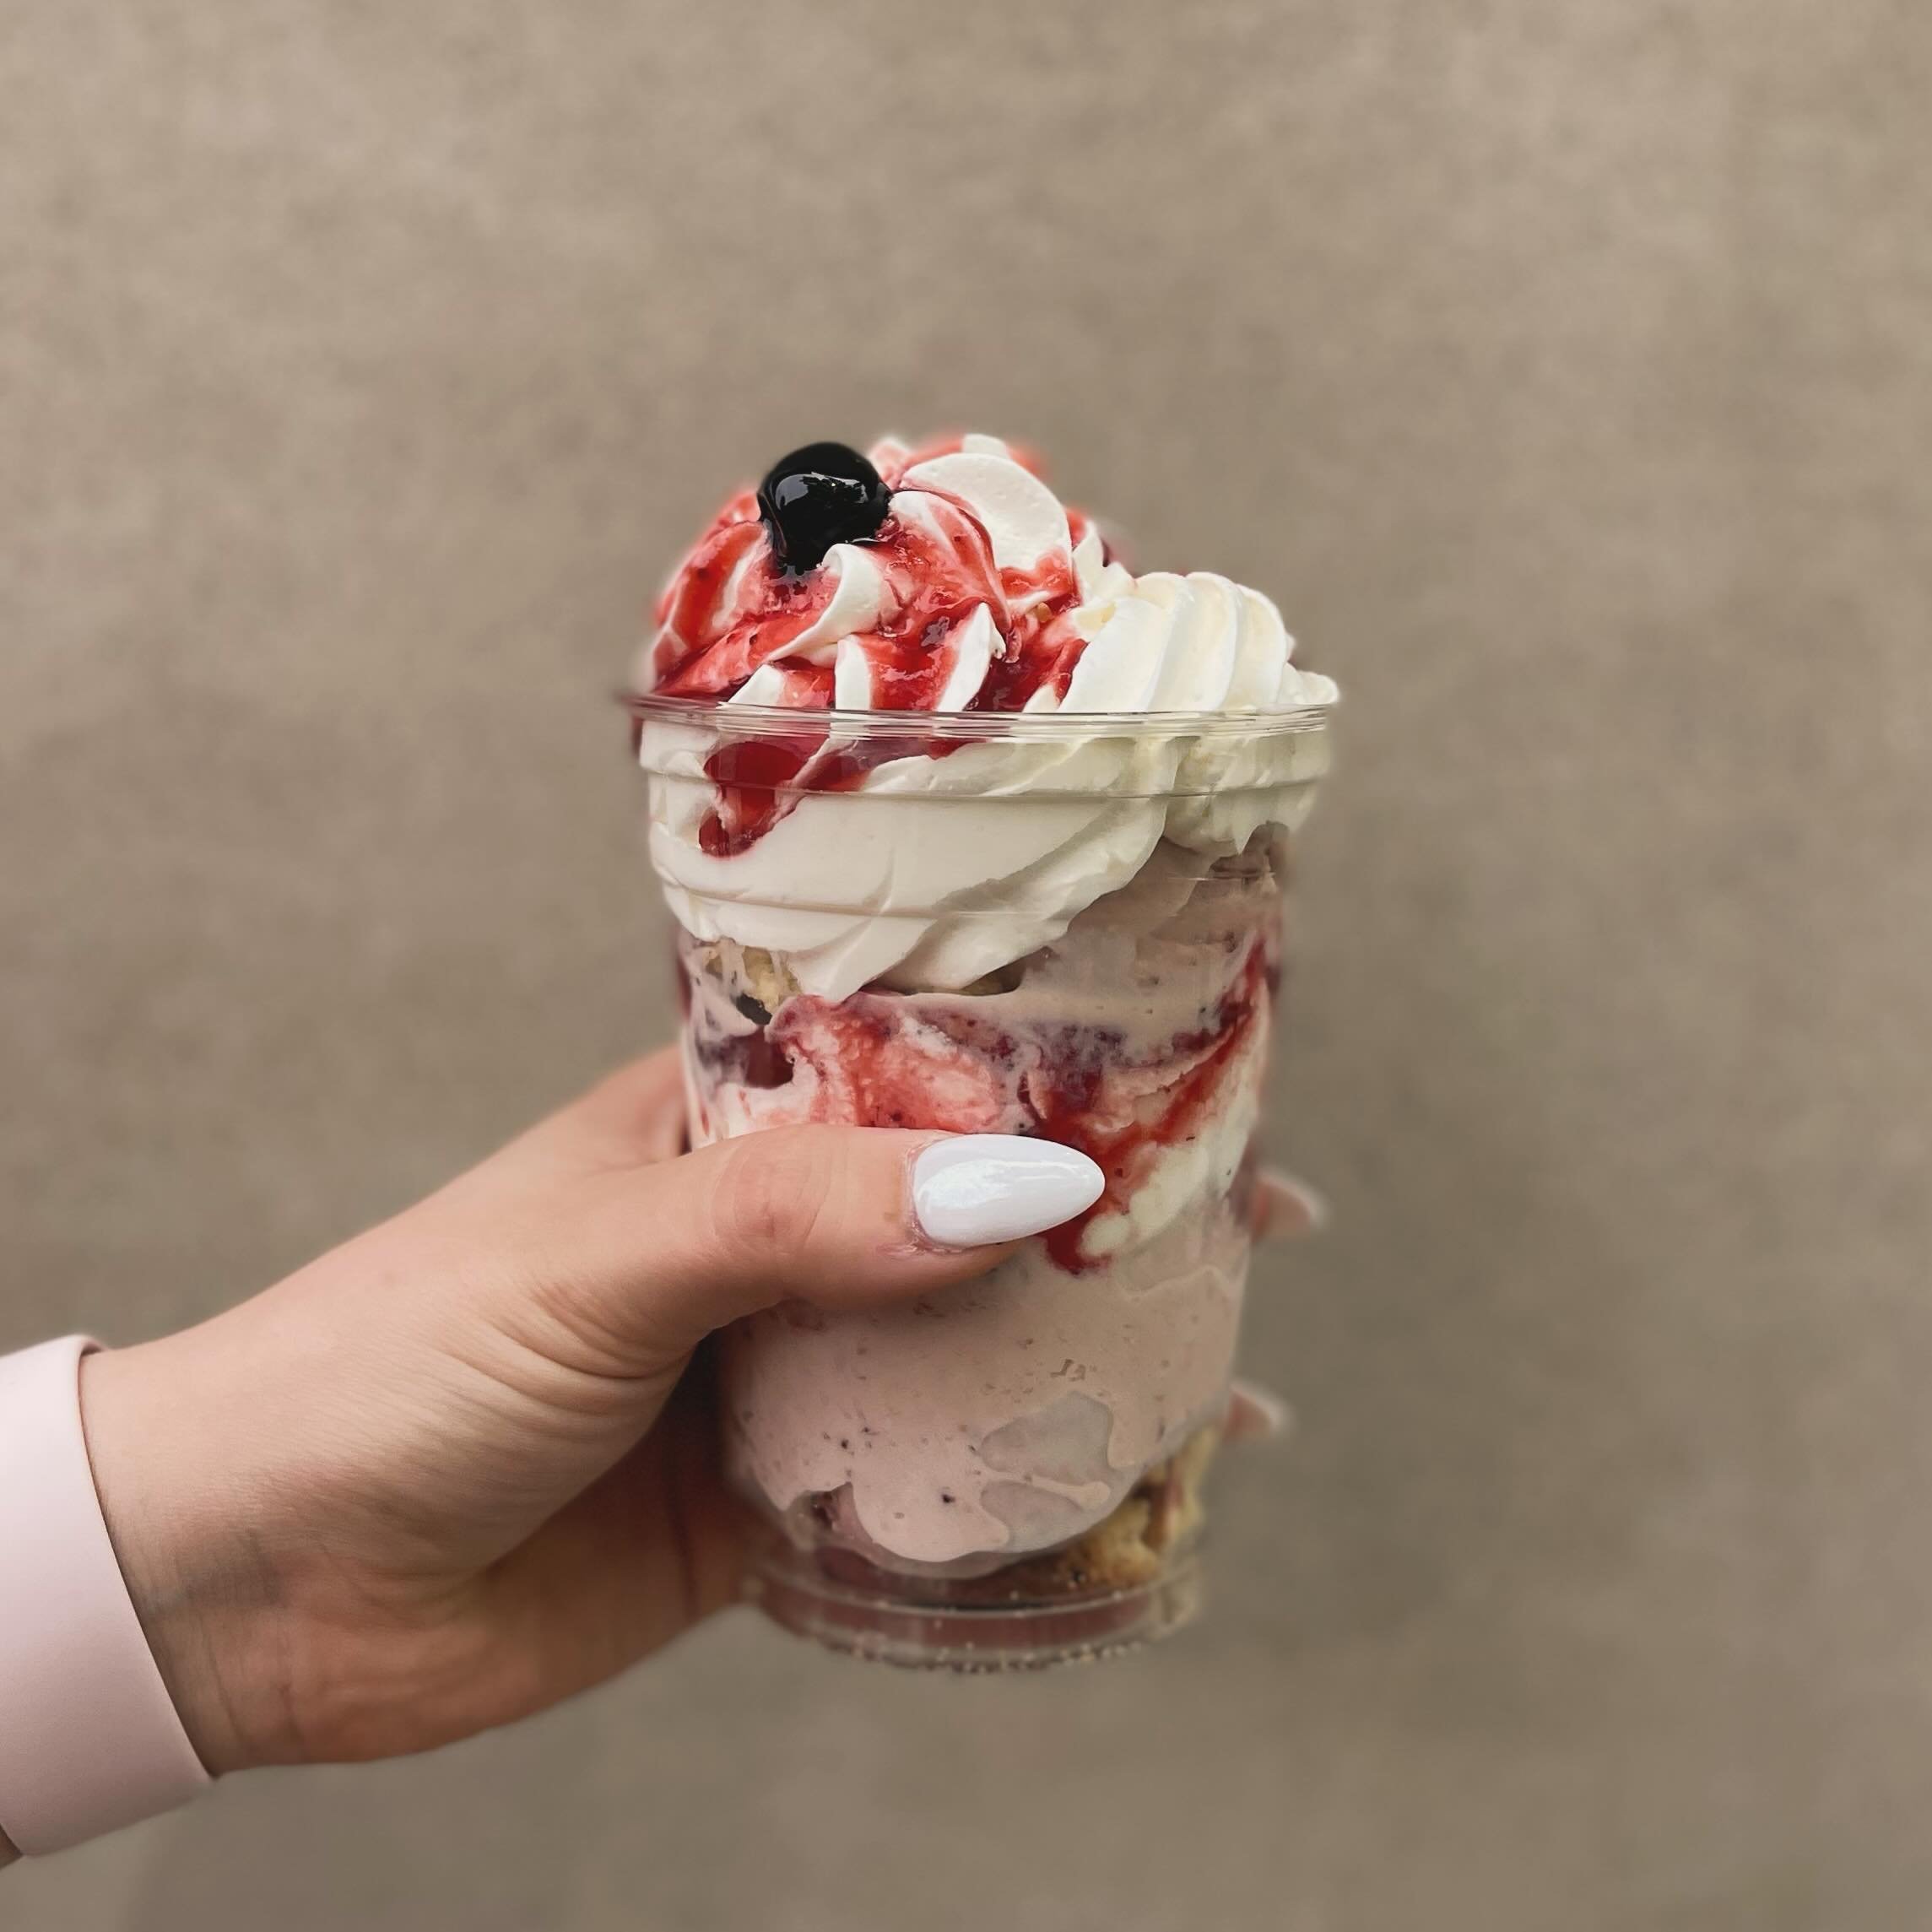 Celebrate National Small Business Day with a sweet treat from Hattie Jane&rsquo;s Creamery! 🍓🥳 We&rsquo;re excited to introduce our new Strawberry Parfait- made with Tennessee strawberries grown fresh from @greendoorgourmet 🌱✨

It&rsquo;s the perf